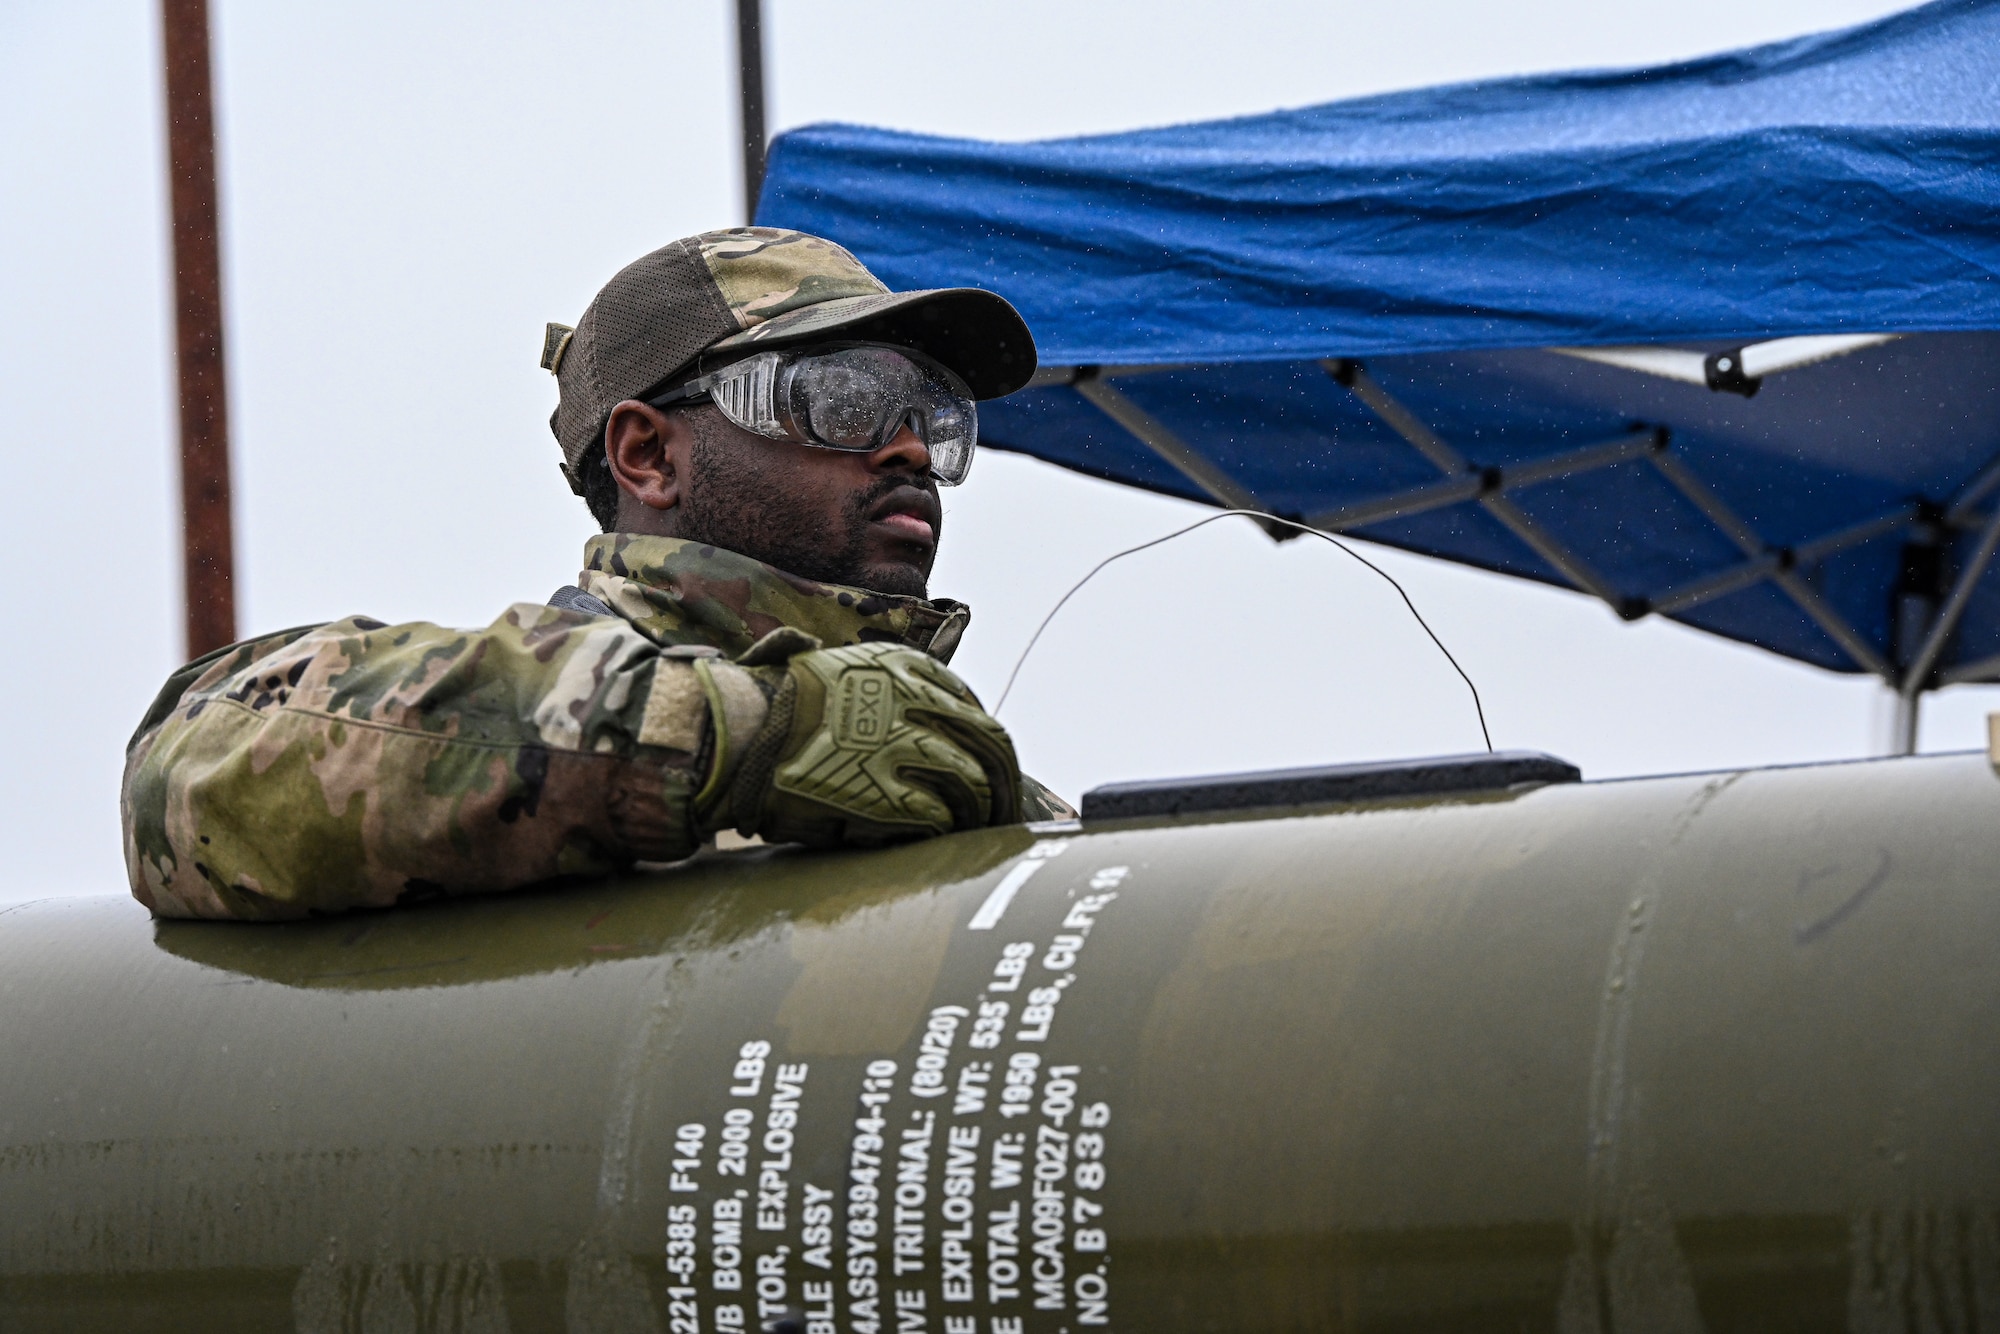 Senior Airman Joshua Diaz-Thomas, 5th Munitions Squadron armament technician, builds a BLU-109 ordnance during Operation Tundra Swan at Minot Air Force Base, North Dakota, Oct. 3, 2023. The BLU-109 warhead is a hard target penetrator ordnance weighing approximately 2,000 pounds, intended to be used against bunkers, aircraft shelters and reinforced concrete structures. (U.S. Air Force photo by Airman 1st Class Alyssa Bankston)